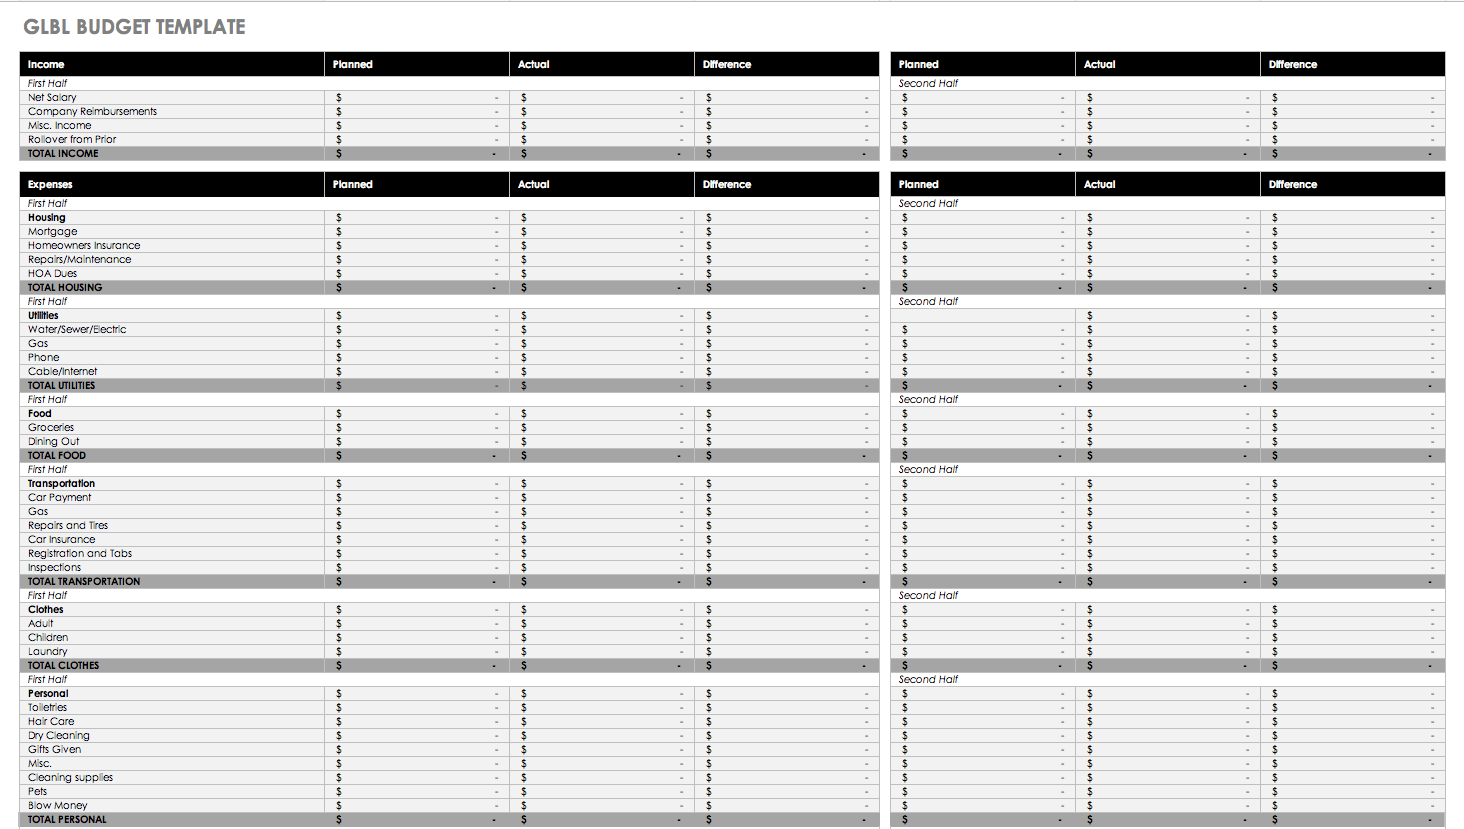 Bills Budget Spreadsheet With Free Budget Templates In Excel For Any Use